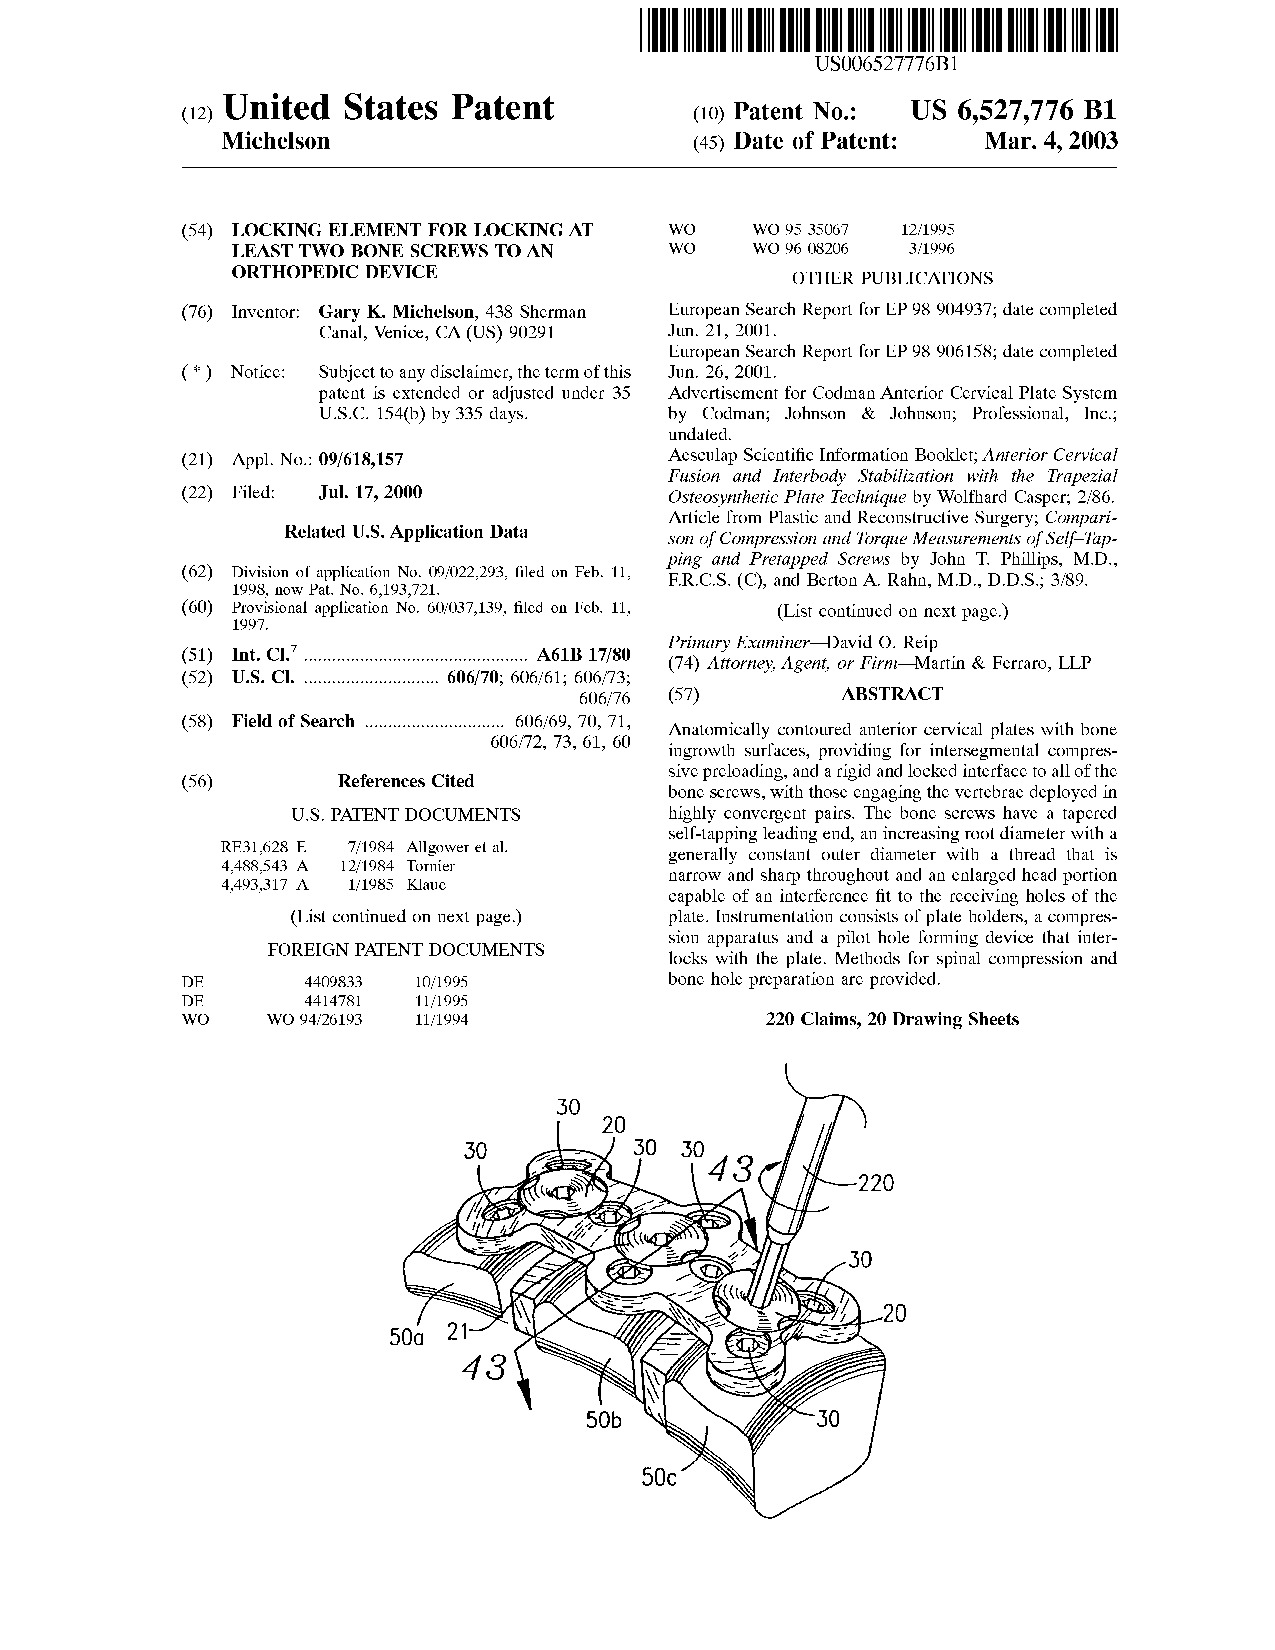 Locking element for locking at least two bone screws to an orthopedic     device - Patent 6,527,776